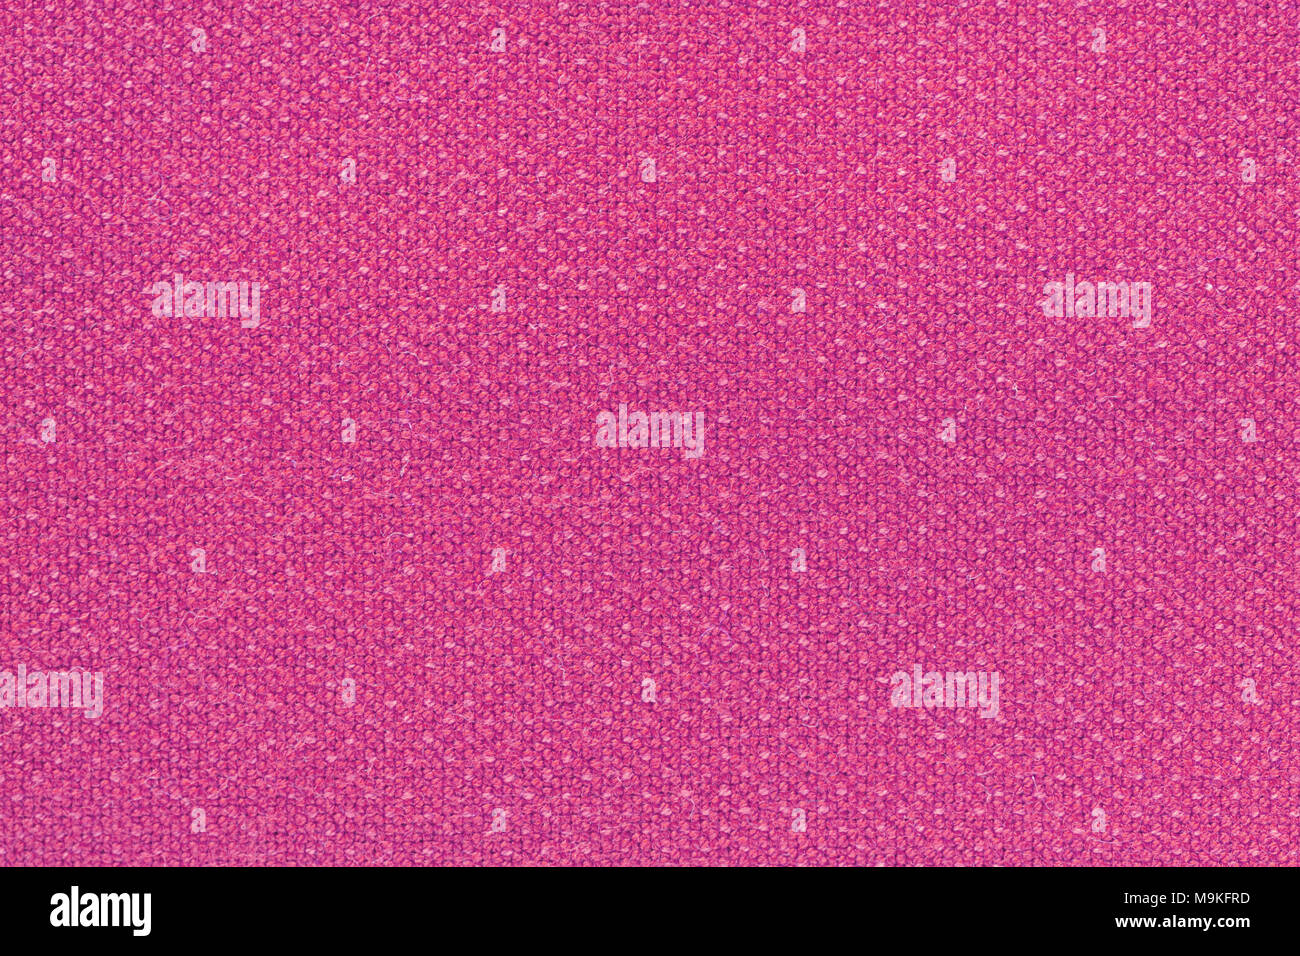 pink washed carpet texture, linen canvas white texture background Stock Photo